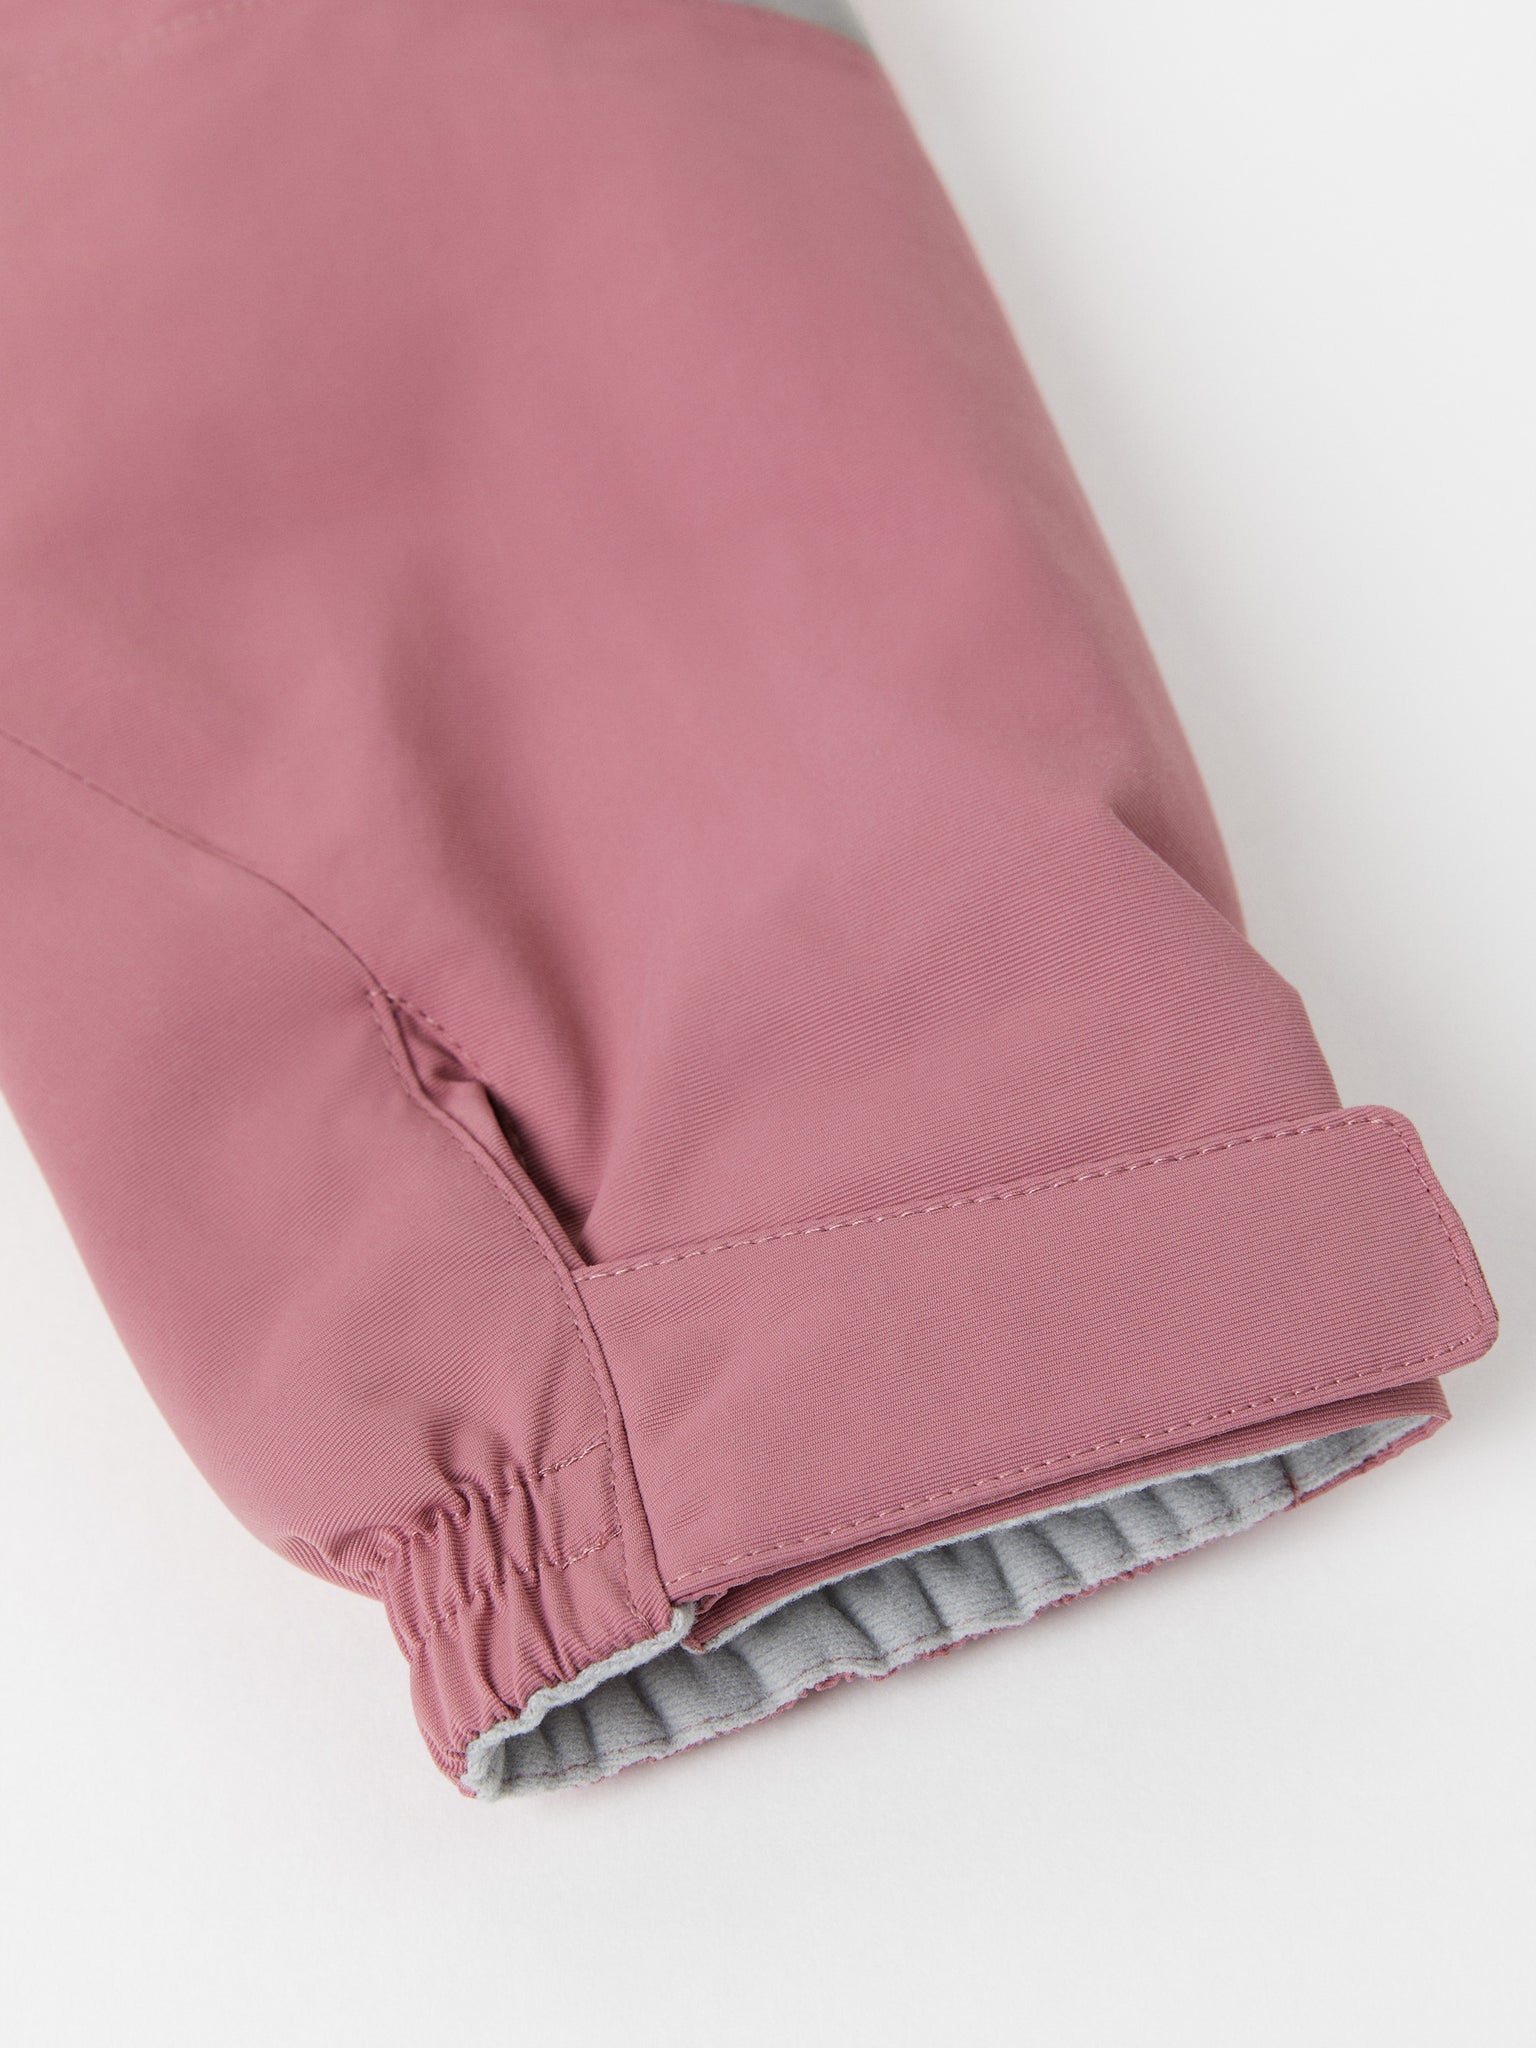 Kids Pink Waterproof Shell Jacket from the Polarn O. Pyret outerwear collection. Quality kids clothing made to last.